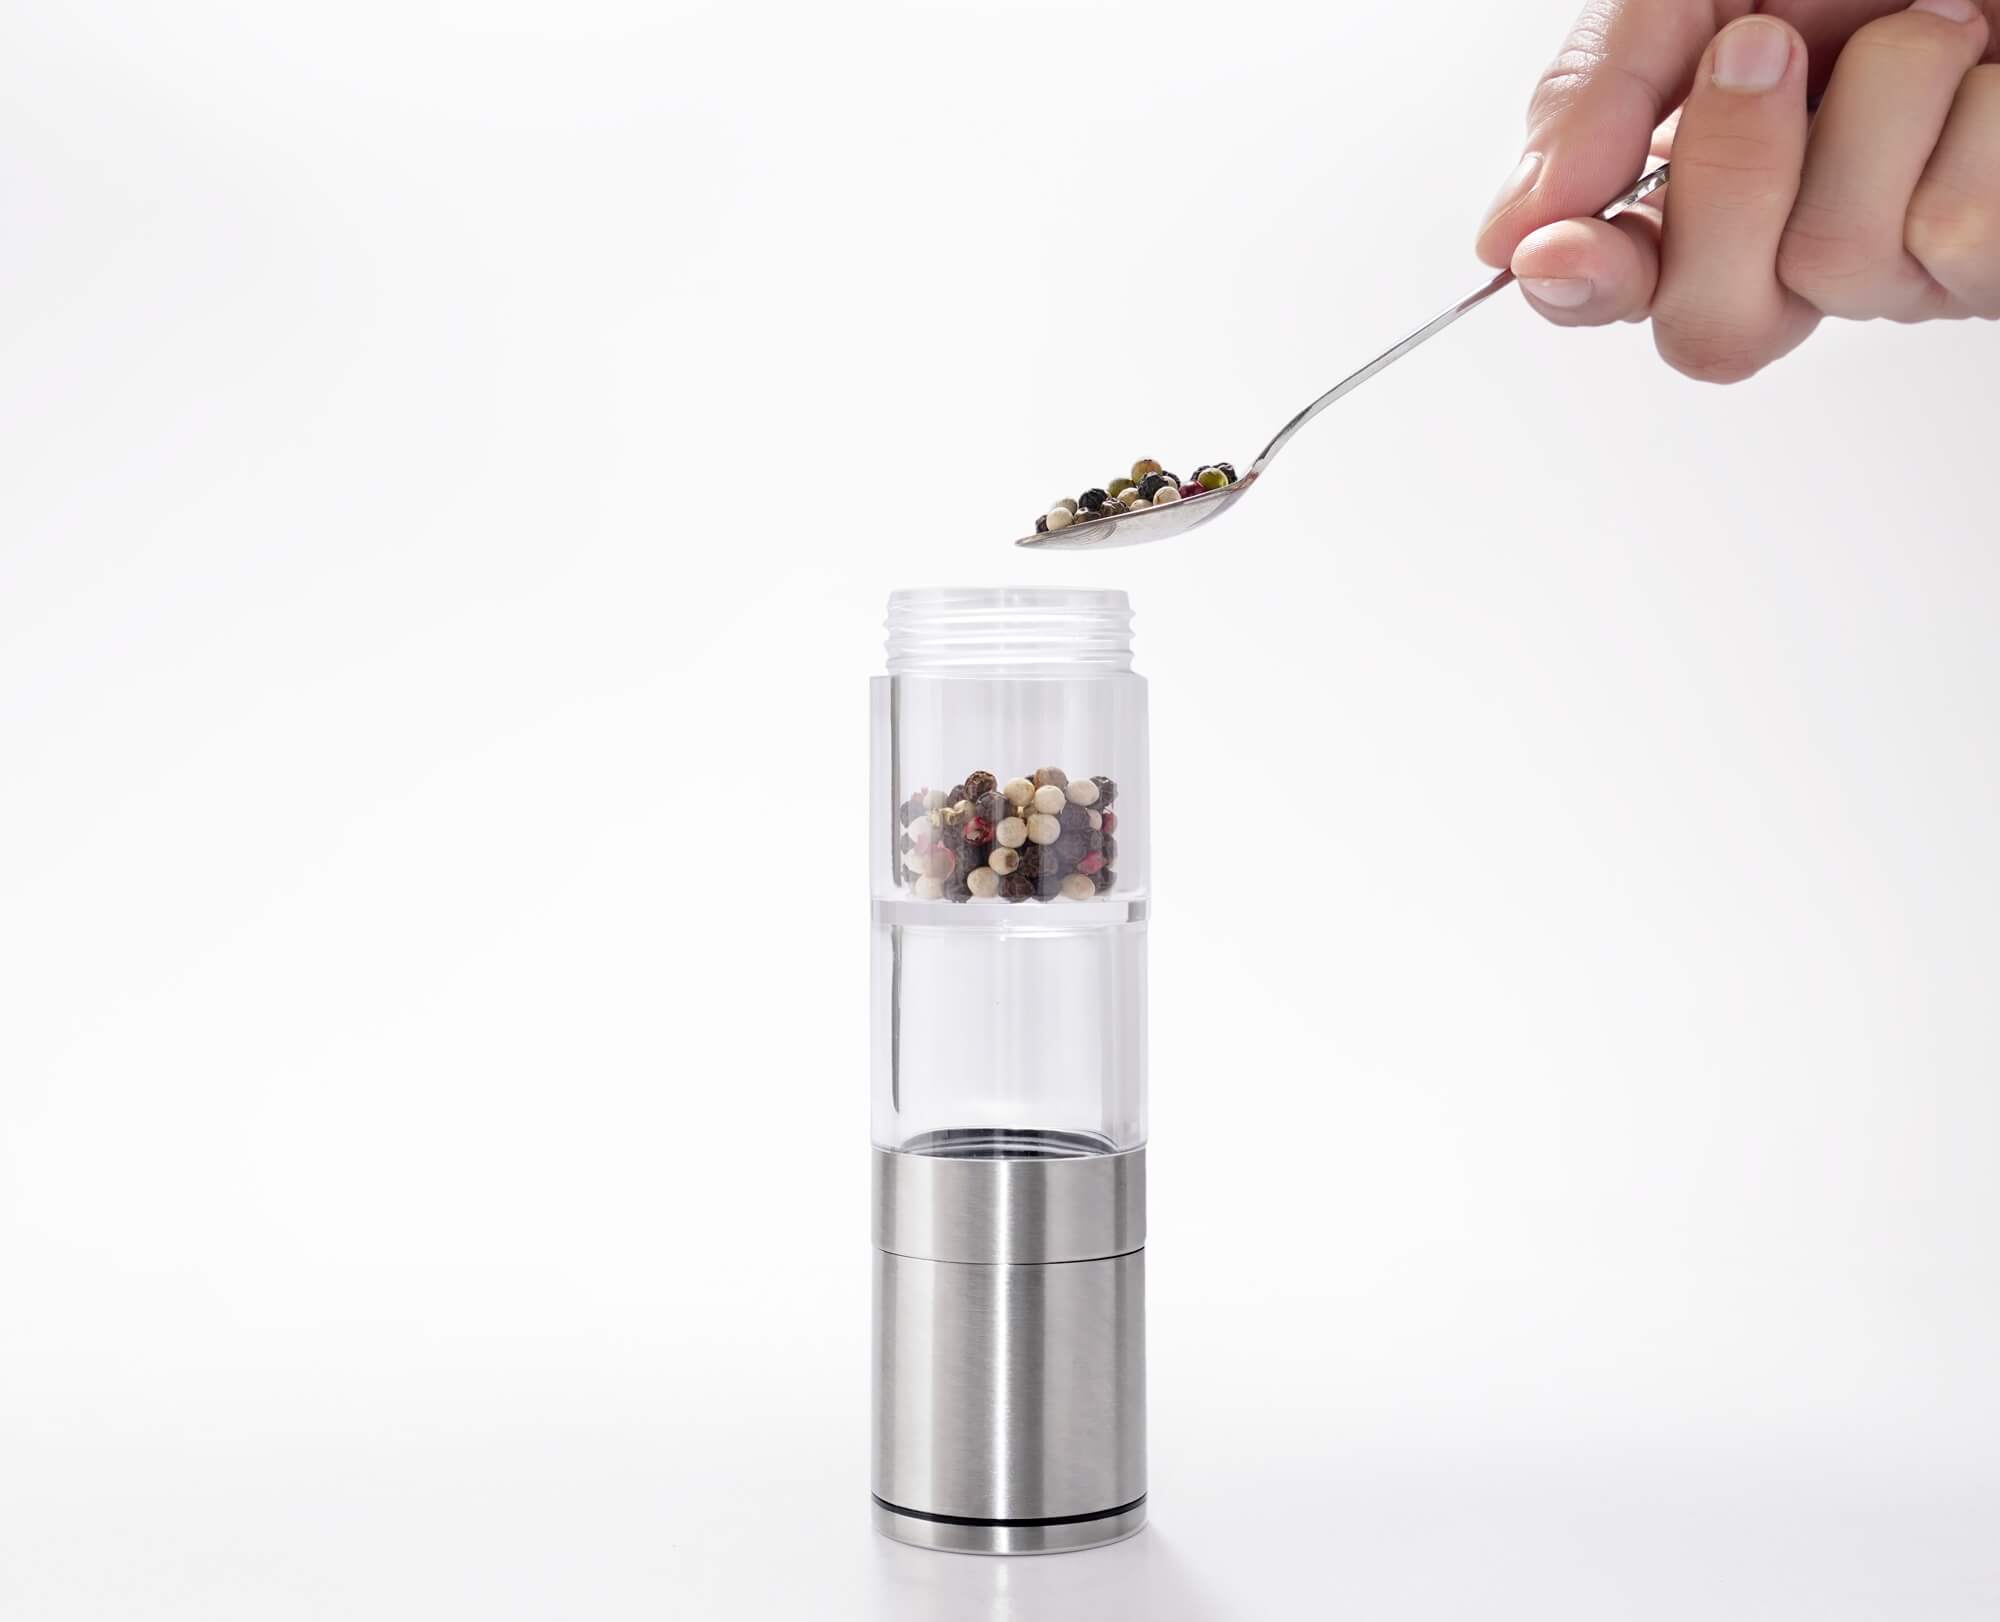 Refilling pepper to Benchusch Compact 2 in 1 Salt and Pepper Grinder